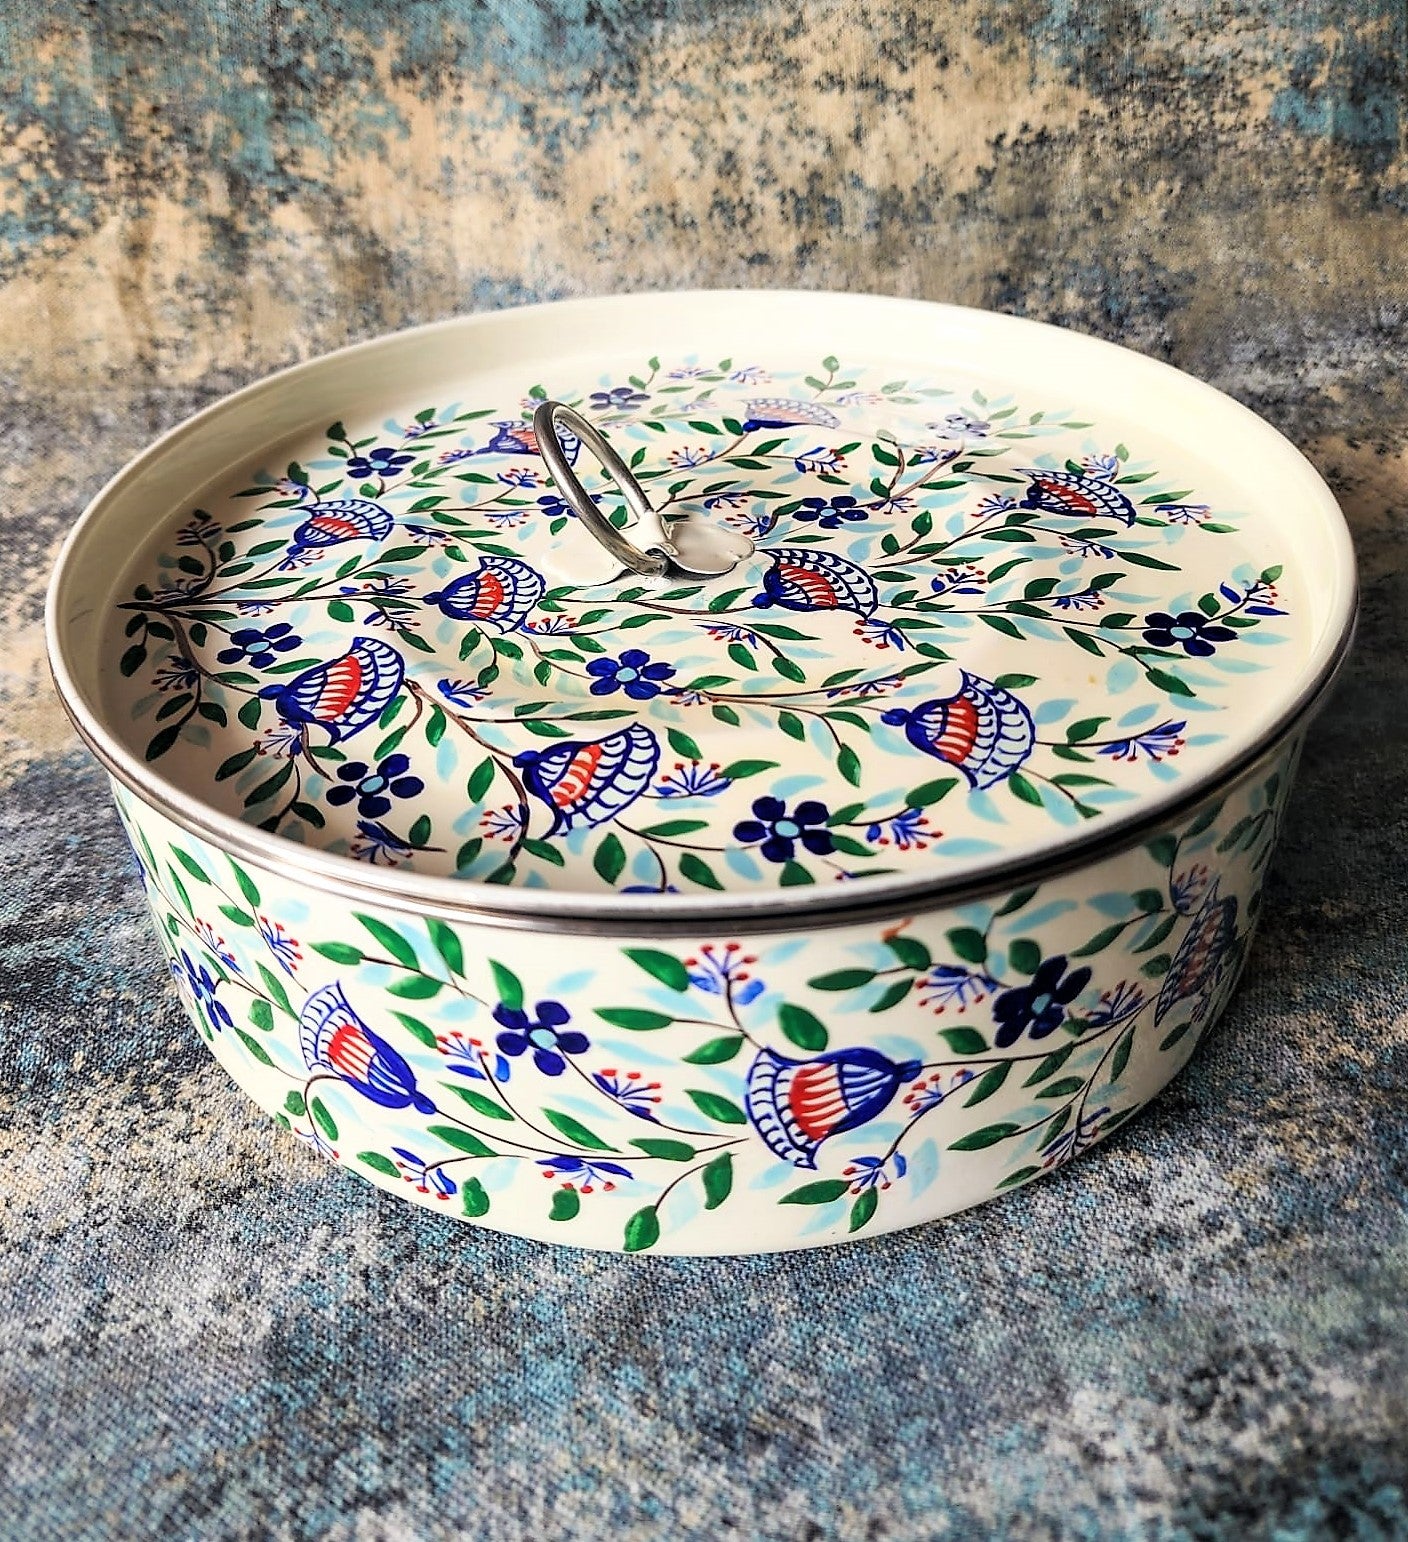 Off White Floral Kashmiri Handpainted Stainless Steel Masala Dabba